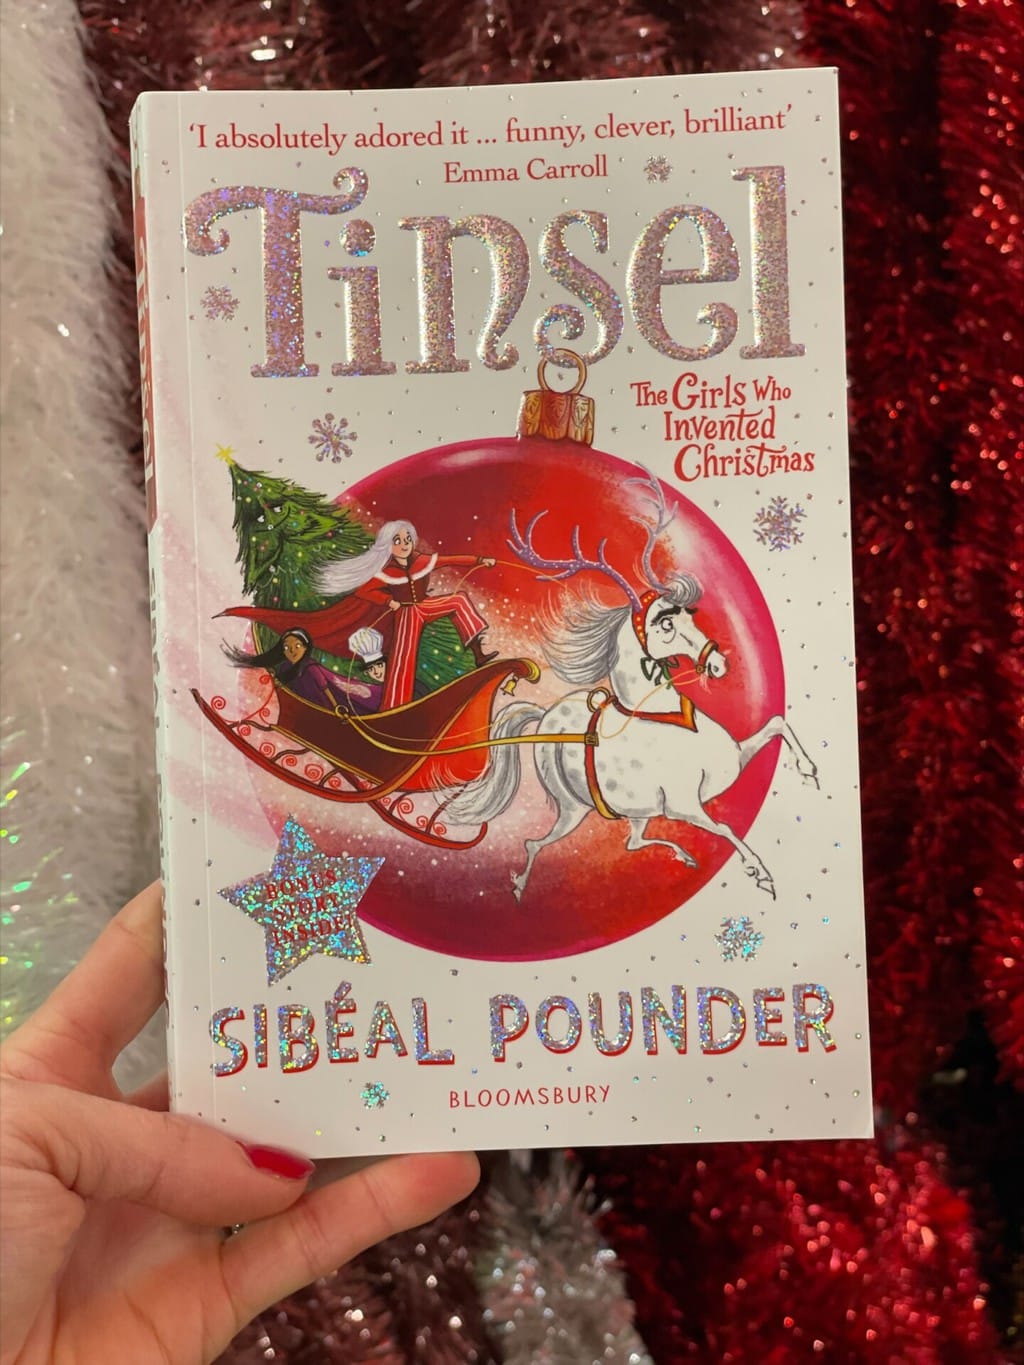 he Girls who Invented Christmas – Sibeal Pounder (author), Sarah Warburton (illustrator) Bloomsbury Children’s (publisher) , recommended reading age: 9 plus